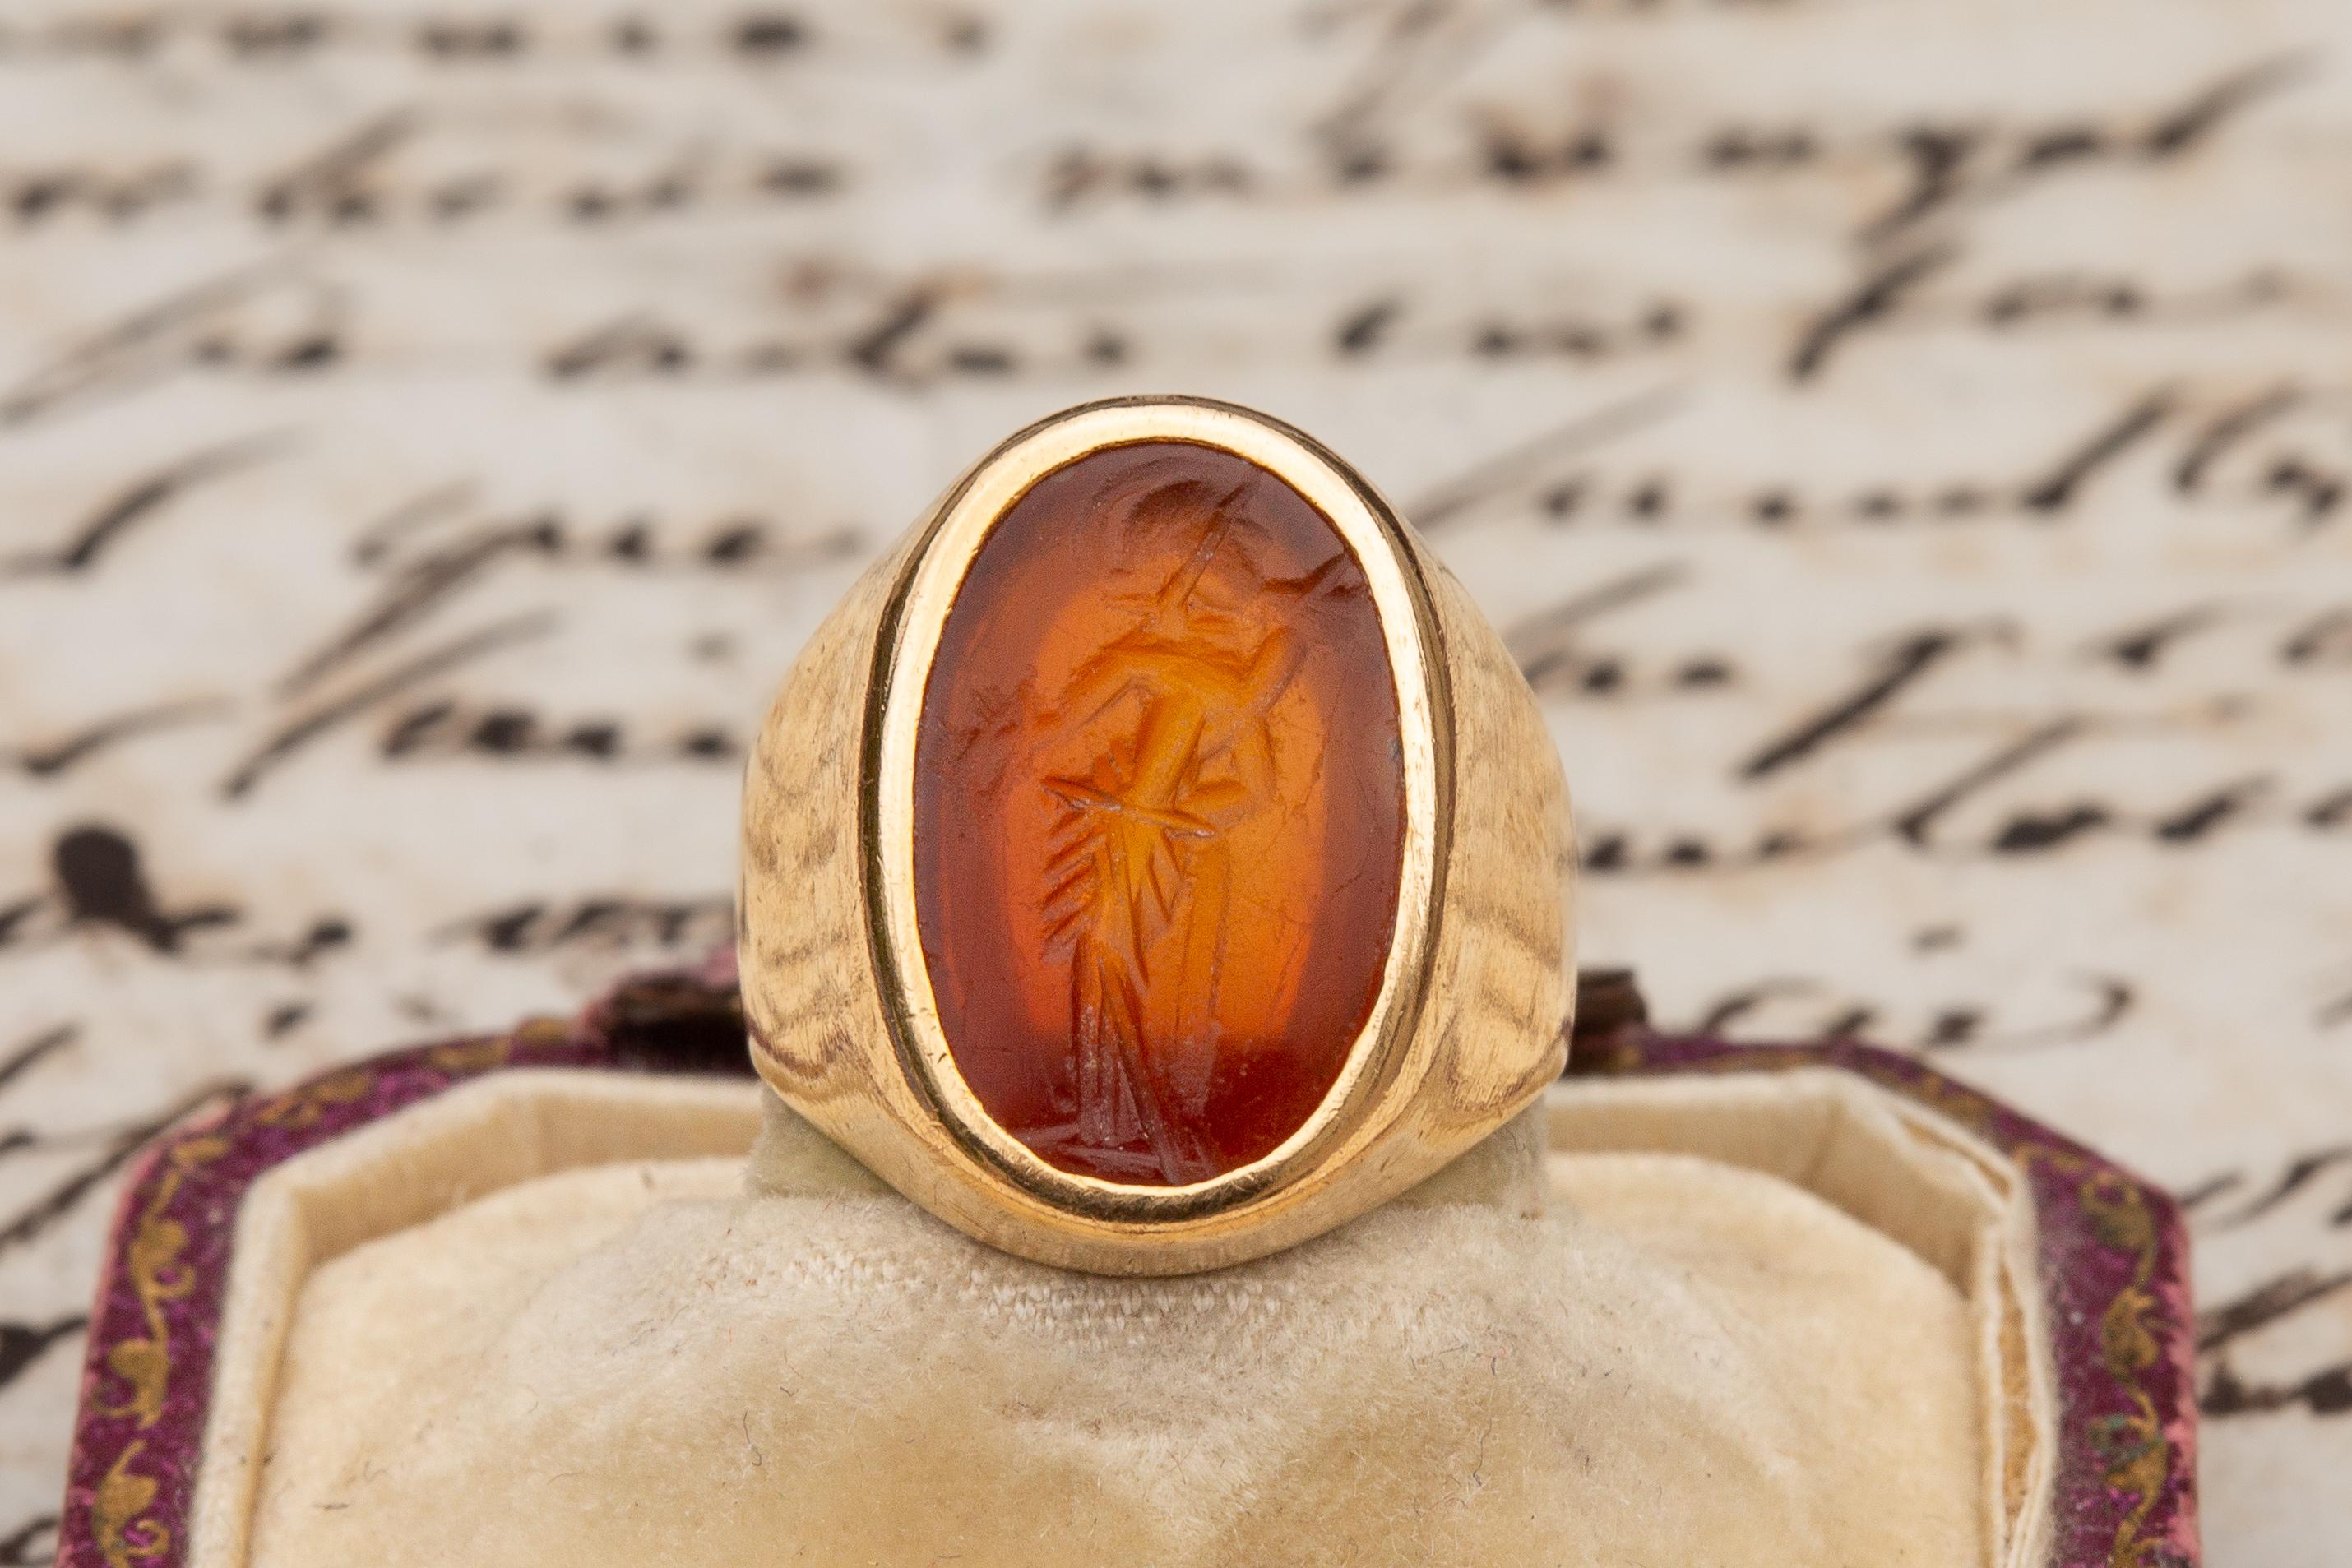 A superb late 19th century (c.1890) French gold signet ring set with an Ancient Roman intaglio. The carnelian gemstone is crudely engraved and dates to the 1st-3rd century AD.  It is typical of Romano-British intaglios and depicts Fortuna, the Roman